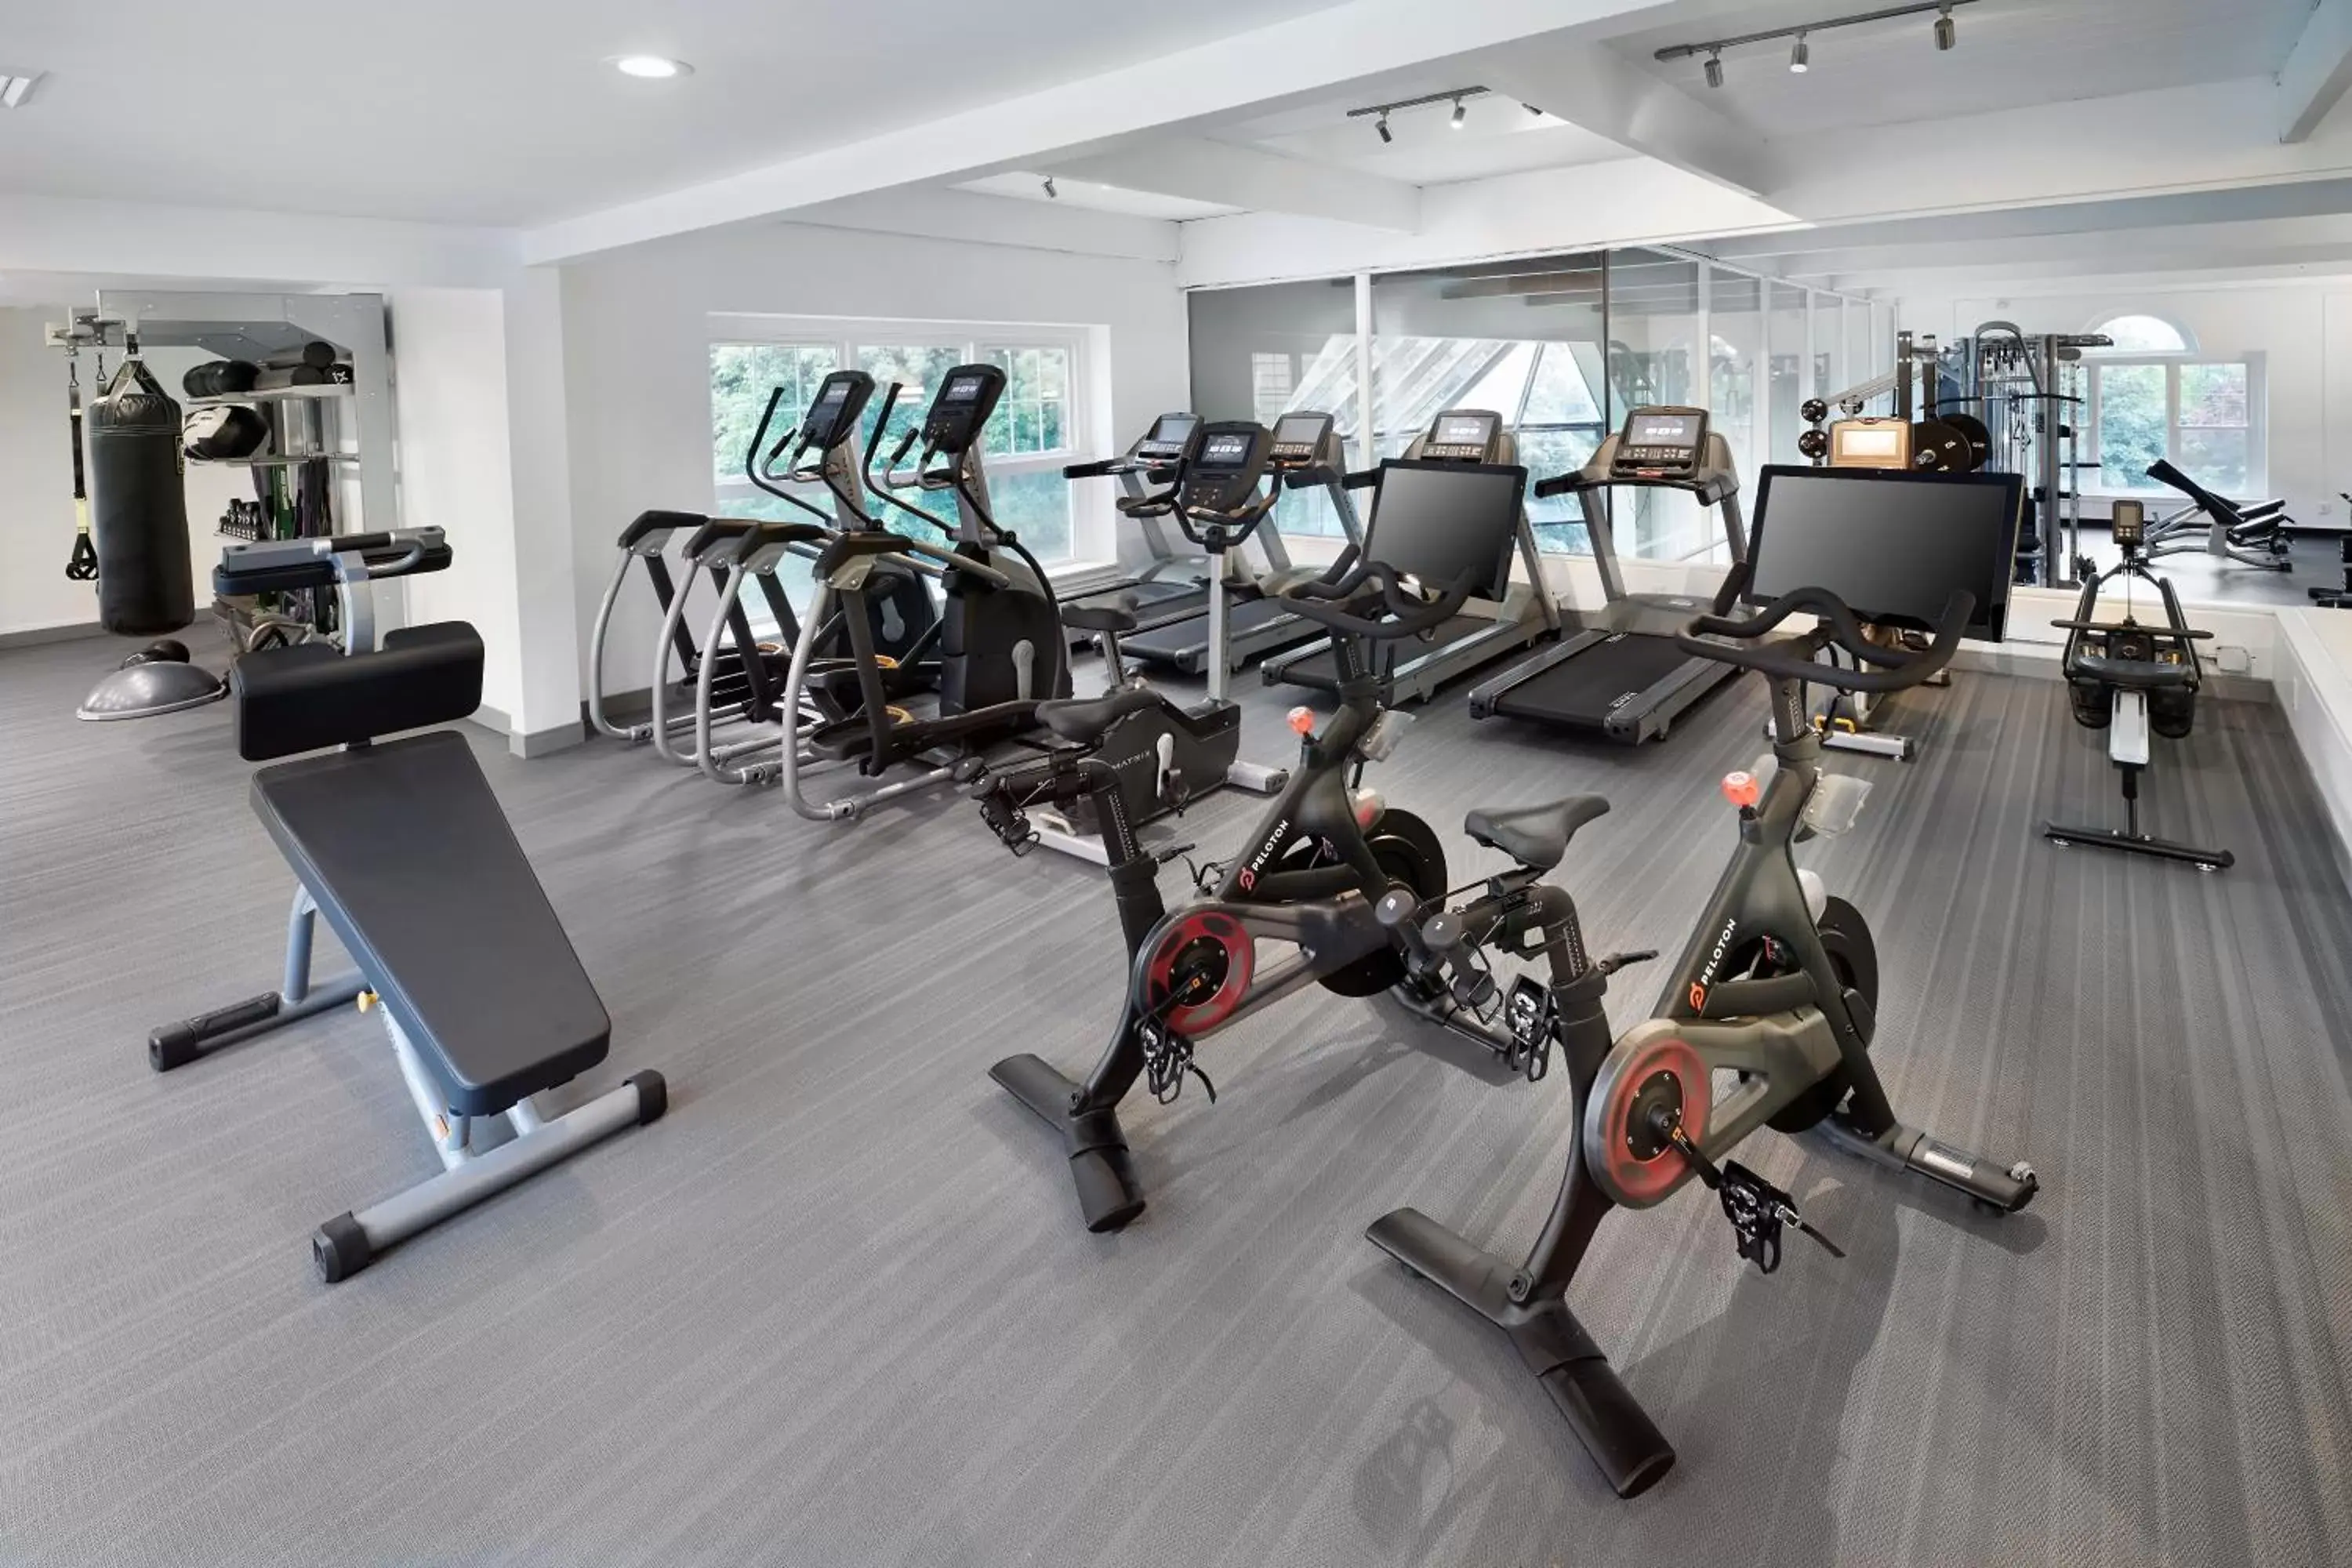 Fitness centre/facilities, Fitness Center/Facilities in Tarrytown House Estate on the Hudson